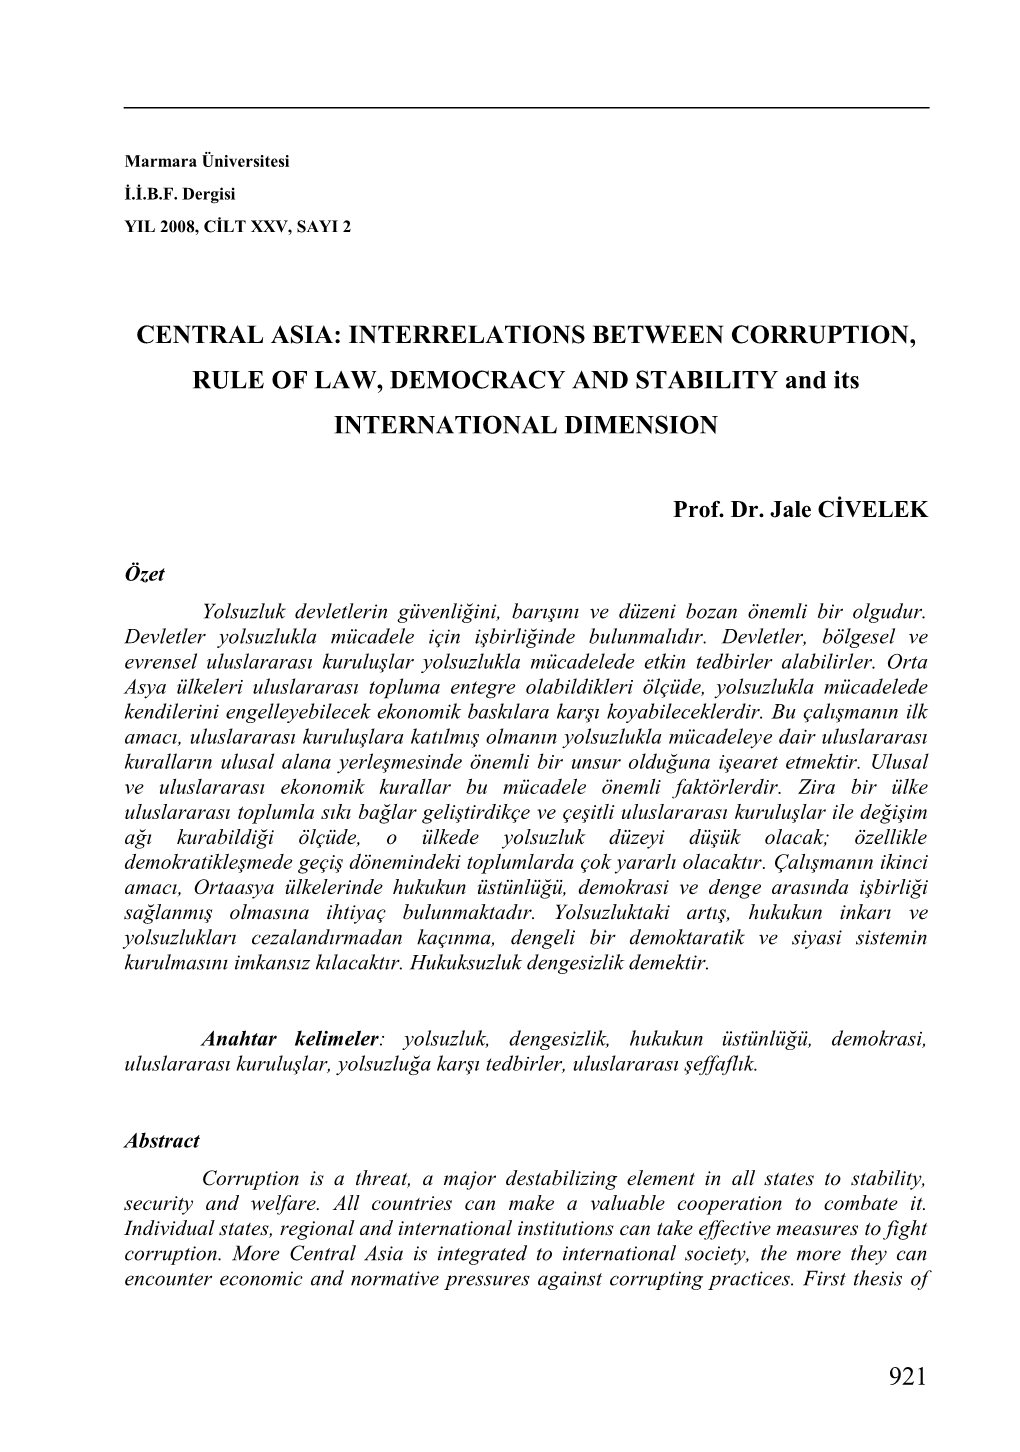 CENTRAL ASIA: INTERRELATIONS BETWEEN CORRUPTION, RULE of LAW, DEMOCRACY and STABILITY and Its INTERNATIONAL DIMENSION